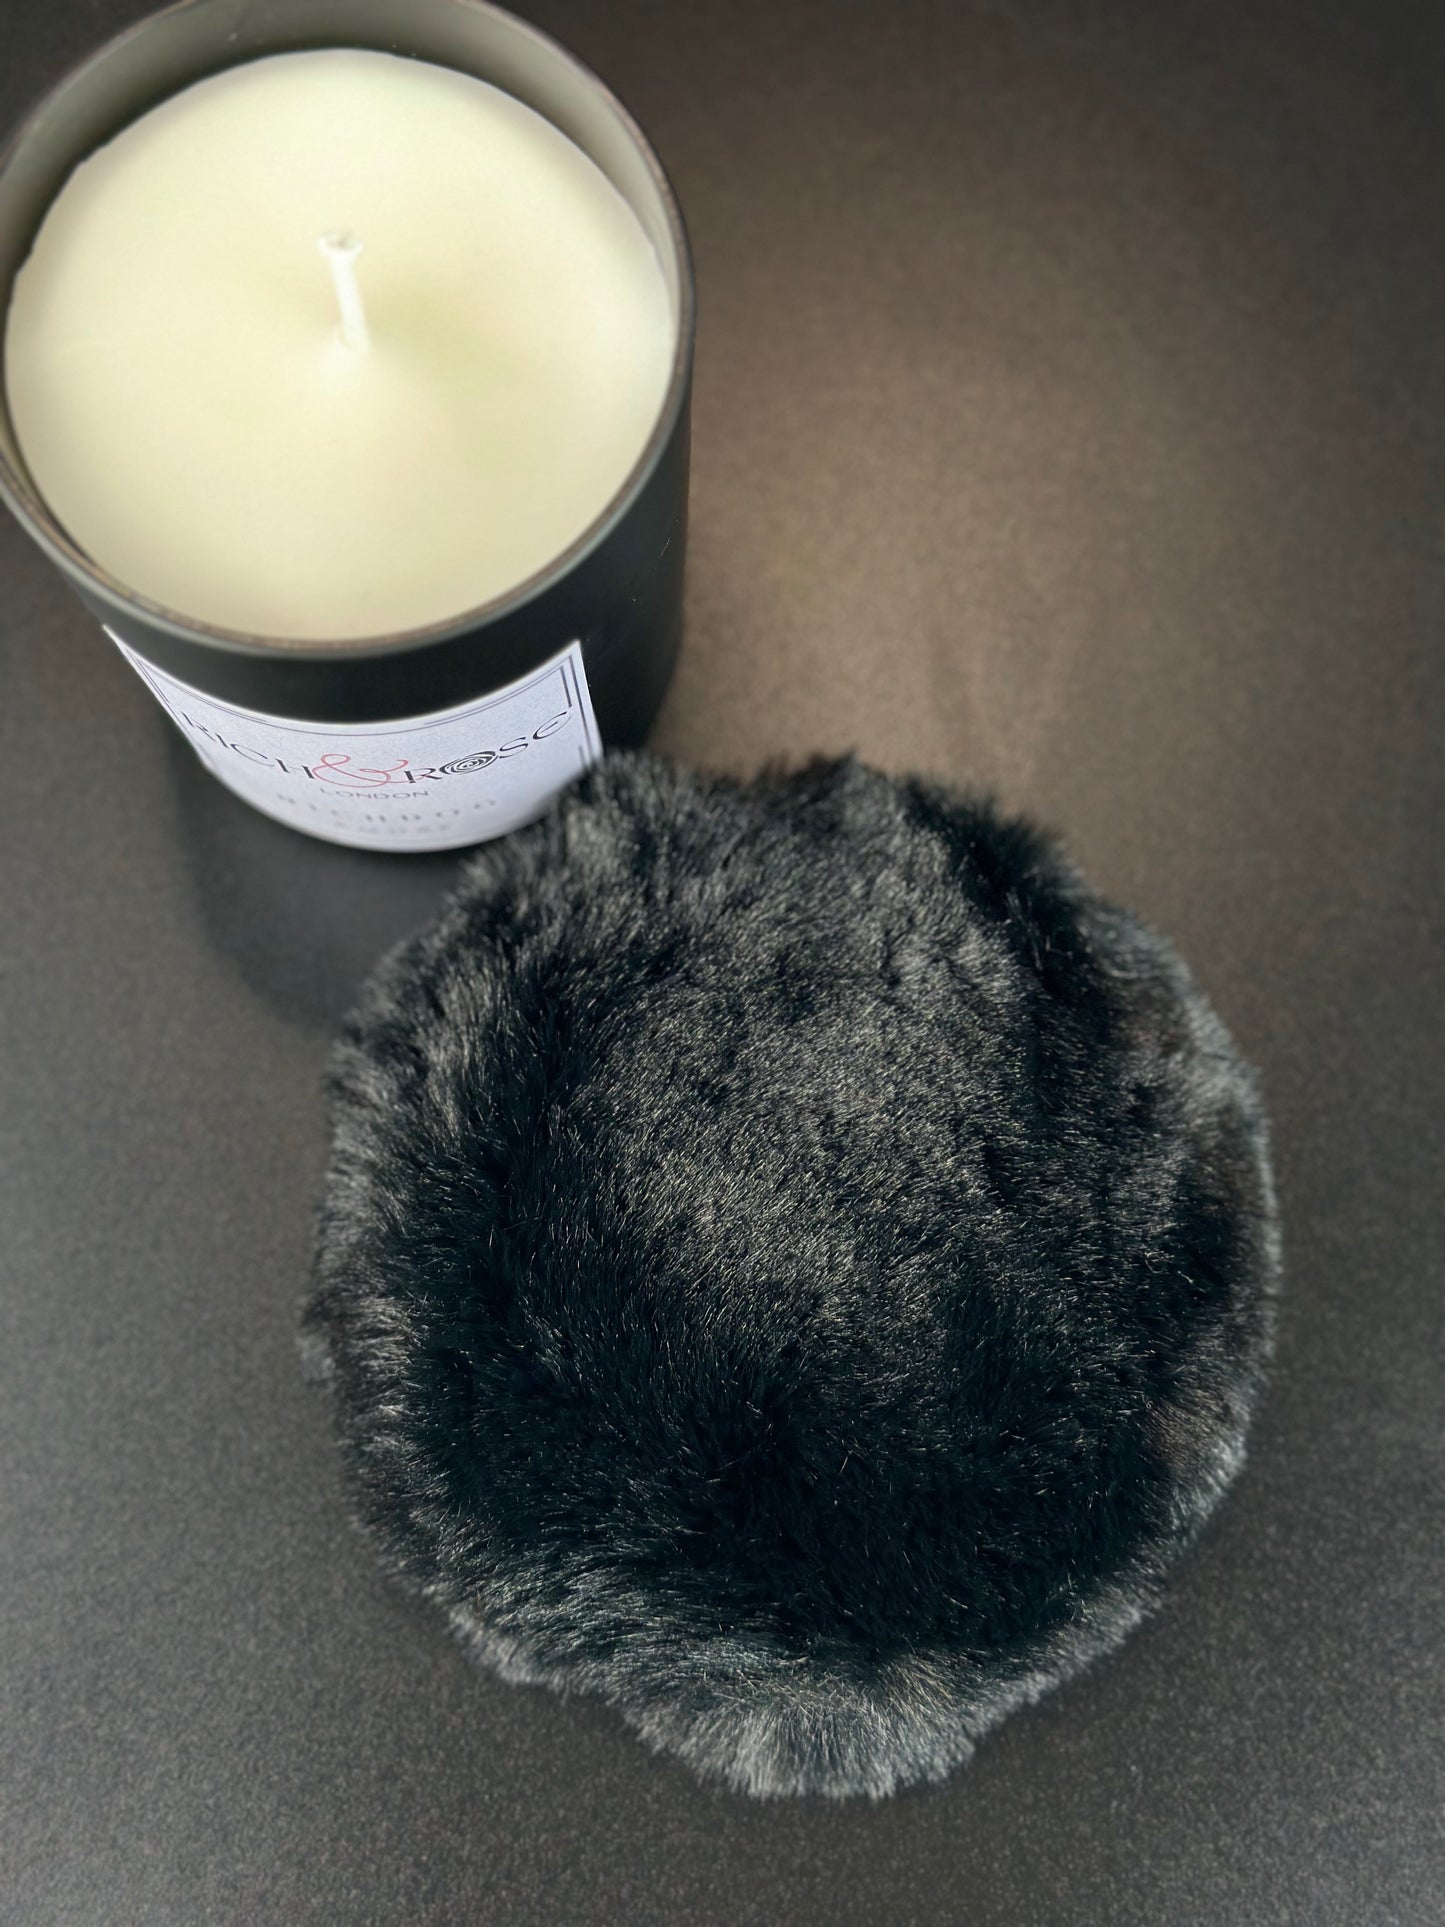 Fluffy gift, faux fur, lion gift, real fur, genuine fur, faux fur , faux fur centre piece, fur interiors, fur decor, faux fur decor, unique gifts for him, unusual gifts, vegan candle, fur gifts, faux fur gift, unique gifts for her ,wolf candle , Beowulf fur, white wolf, fluffy decor, fluffy candle, fluffy interiors.luxury London, London gifts, faux fur gifts, handmade luxury, Dog candle, dog fur, fur ball,